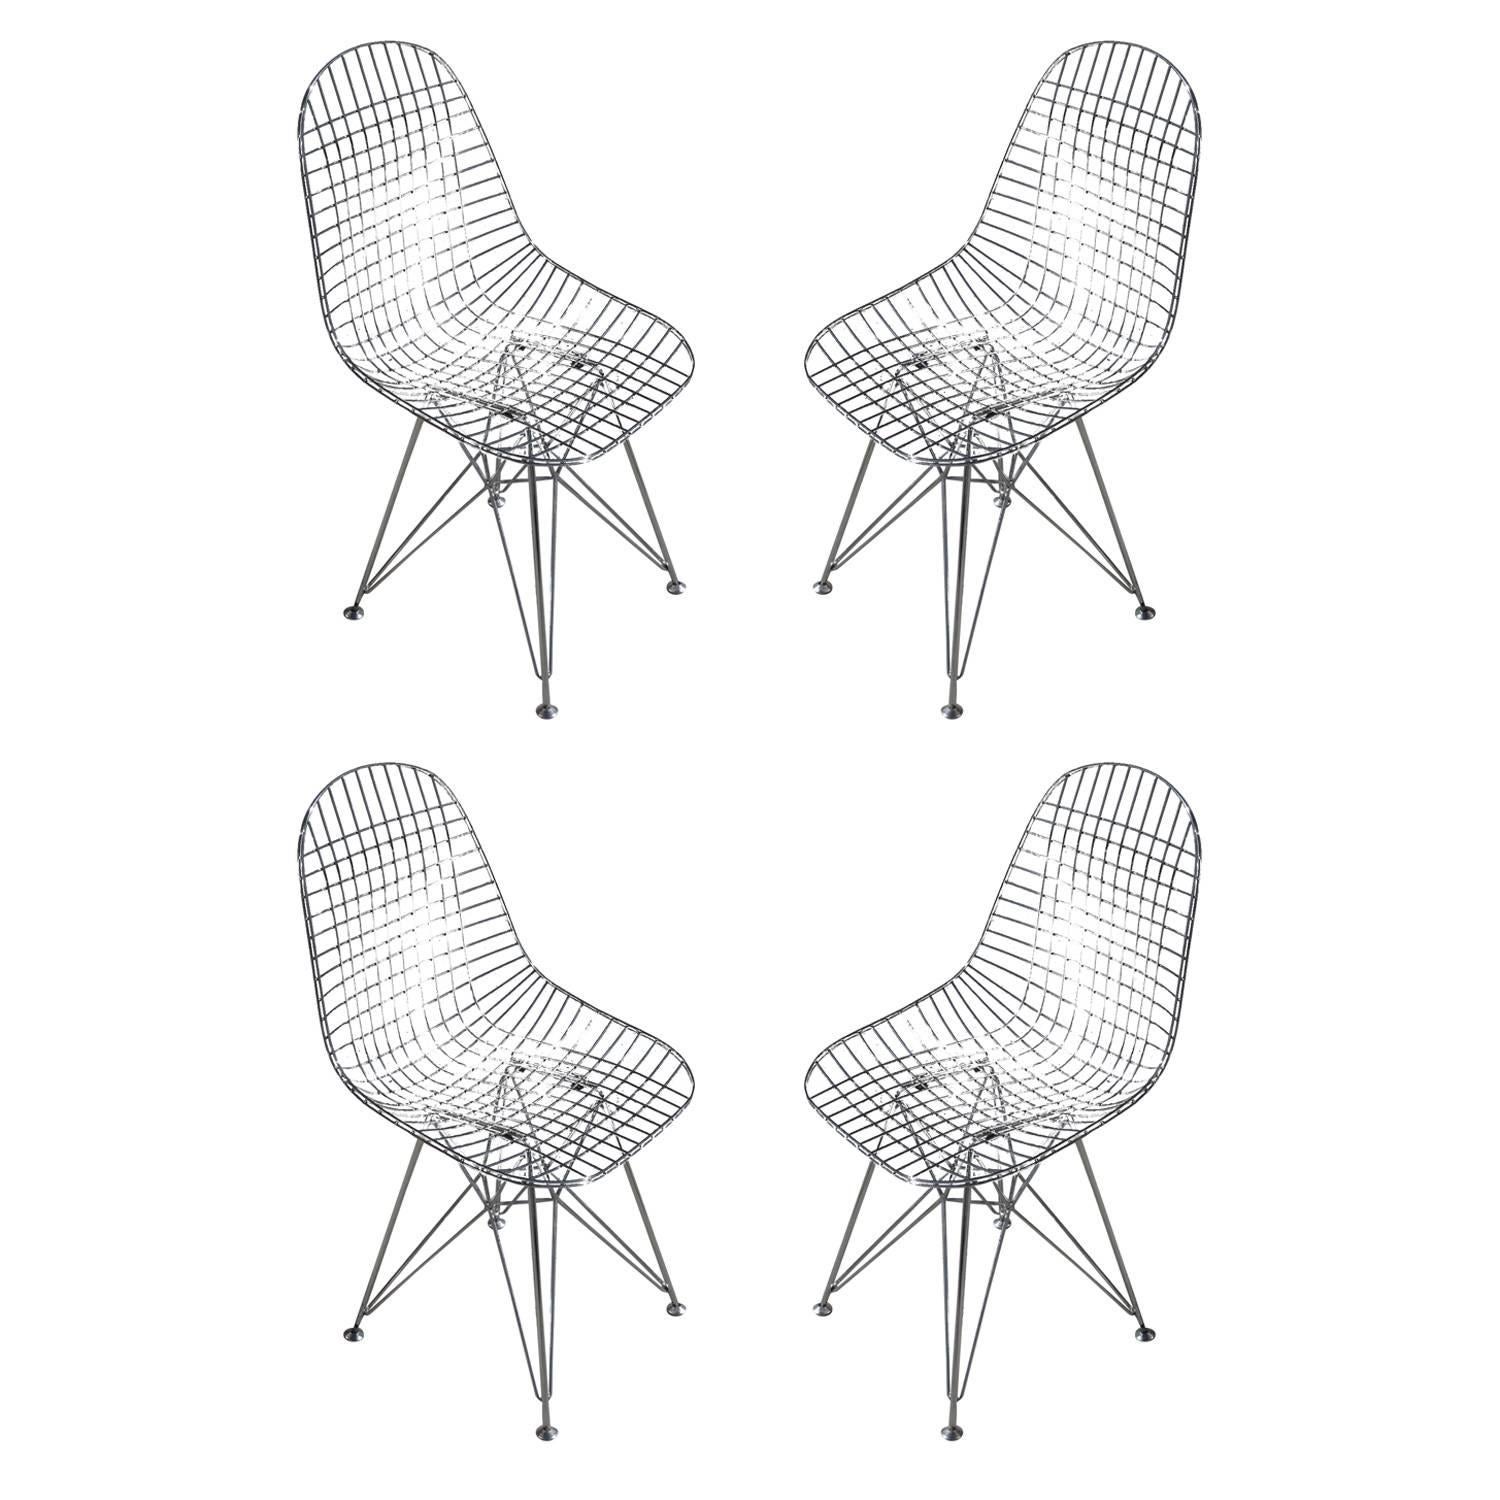 Set of six of chairs.

Charles and Ray Eames' experiments with welded wire led to the design of the DKR in 1951. DKR.0 stands for dining height, wire shell, rod base, no seat pad. The chairs' organic shape and airy silhouette are complemented by